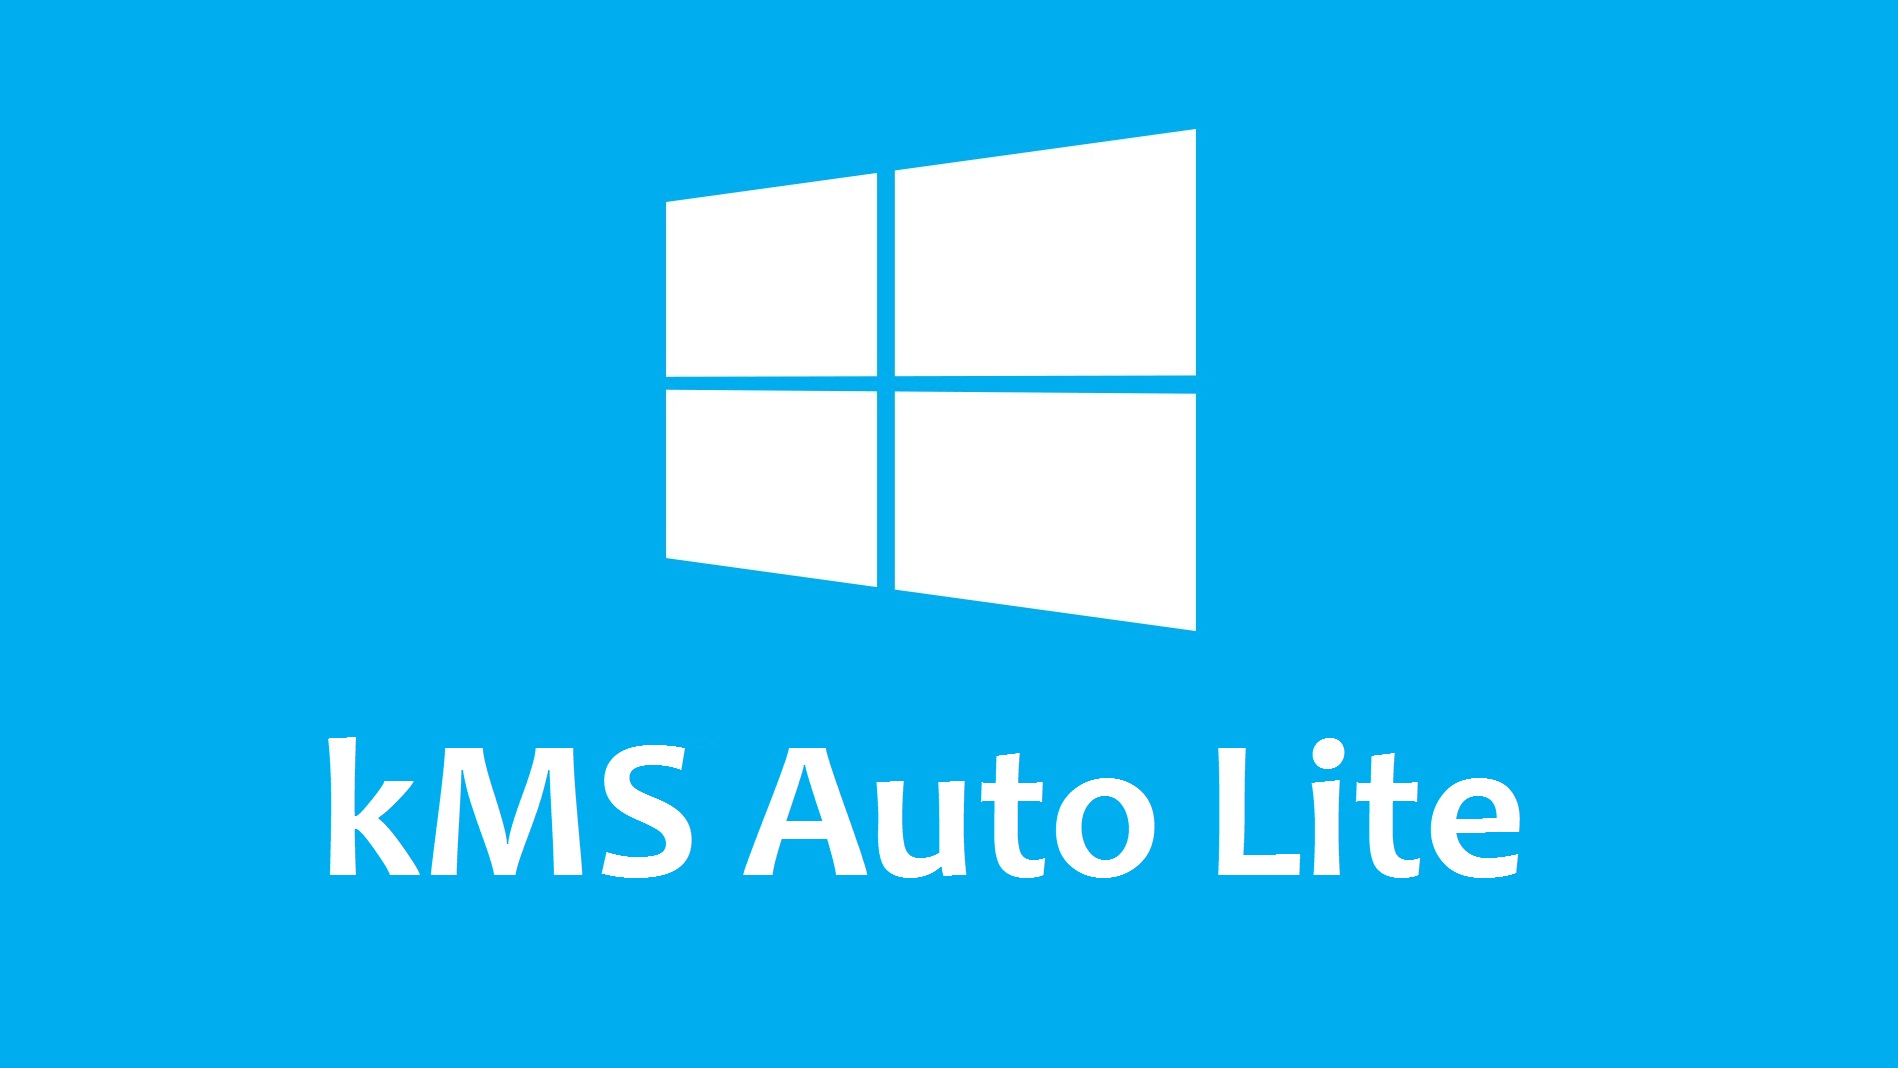 download the last version for iphoneKMSAuto++ 1.8.5